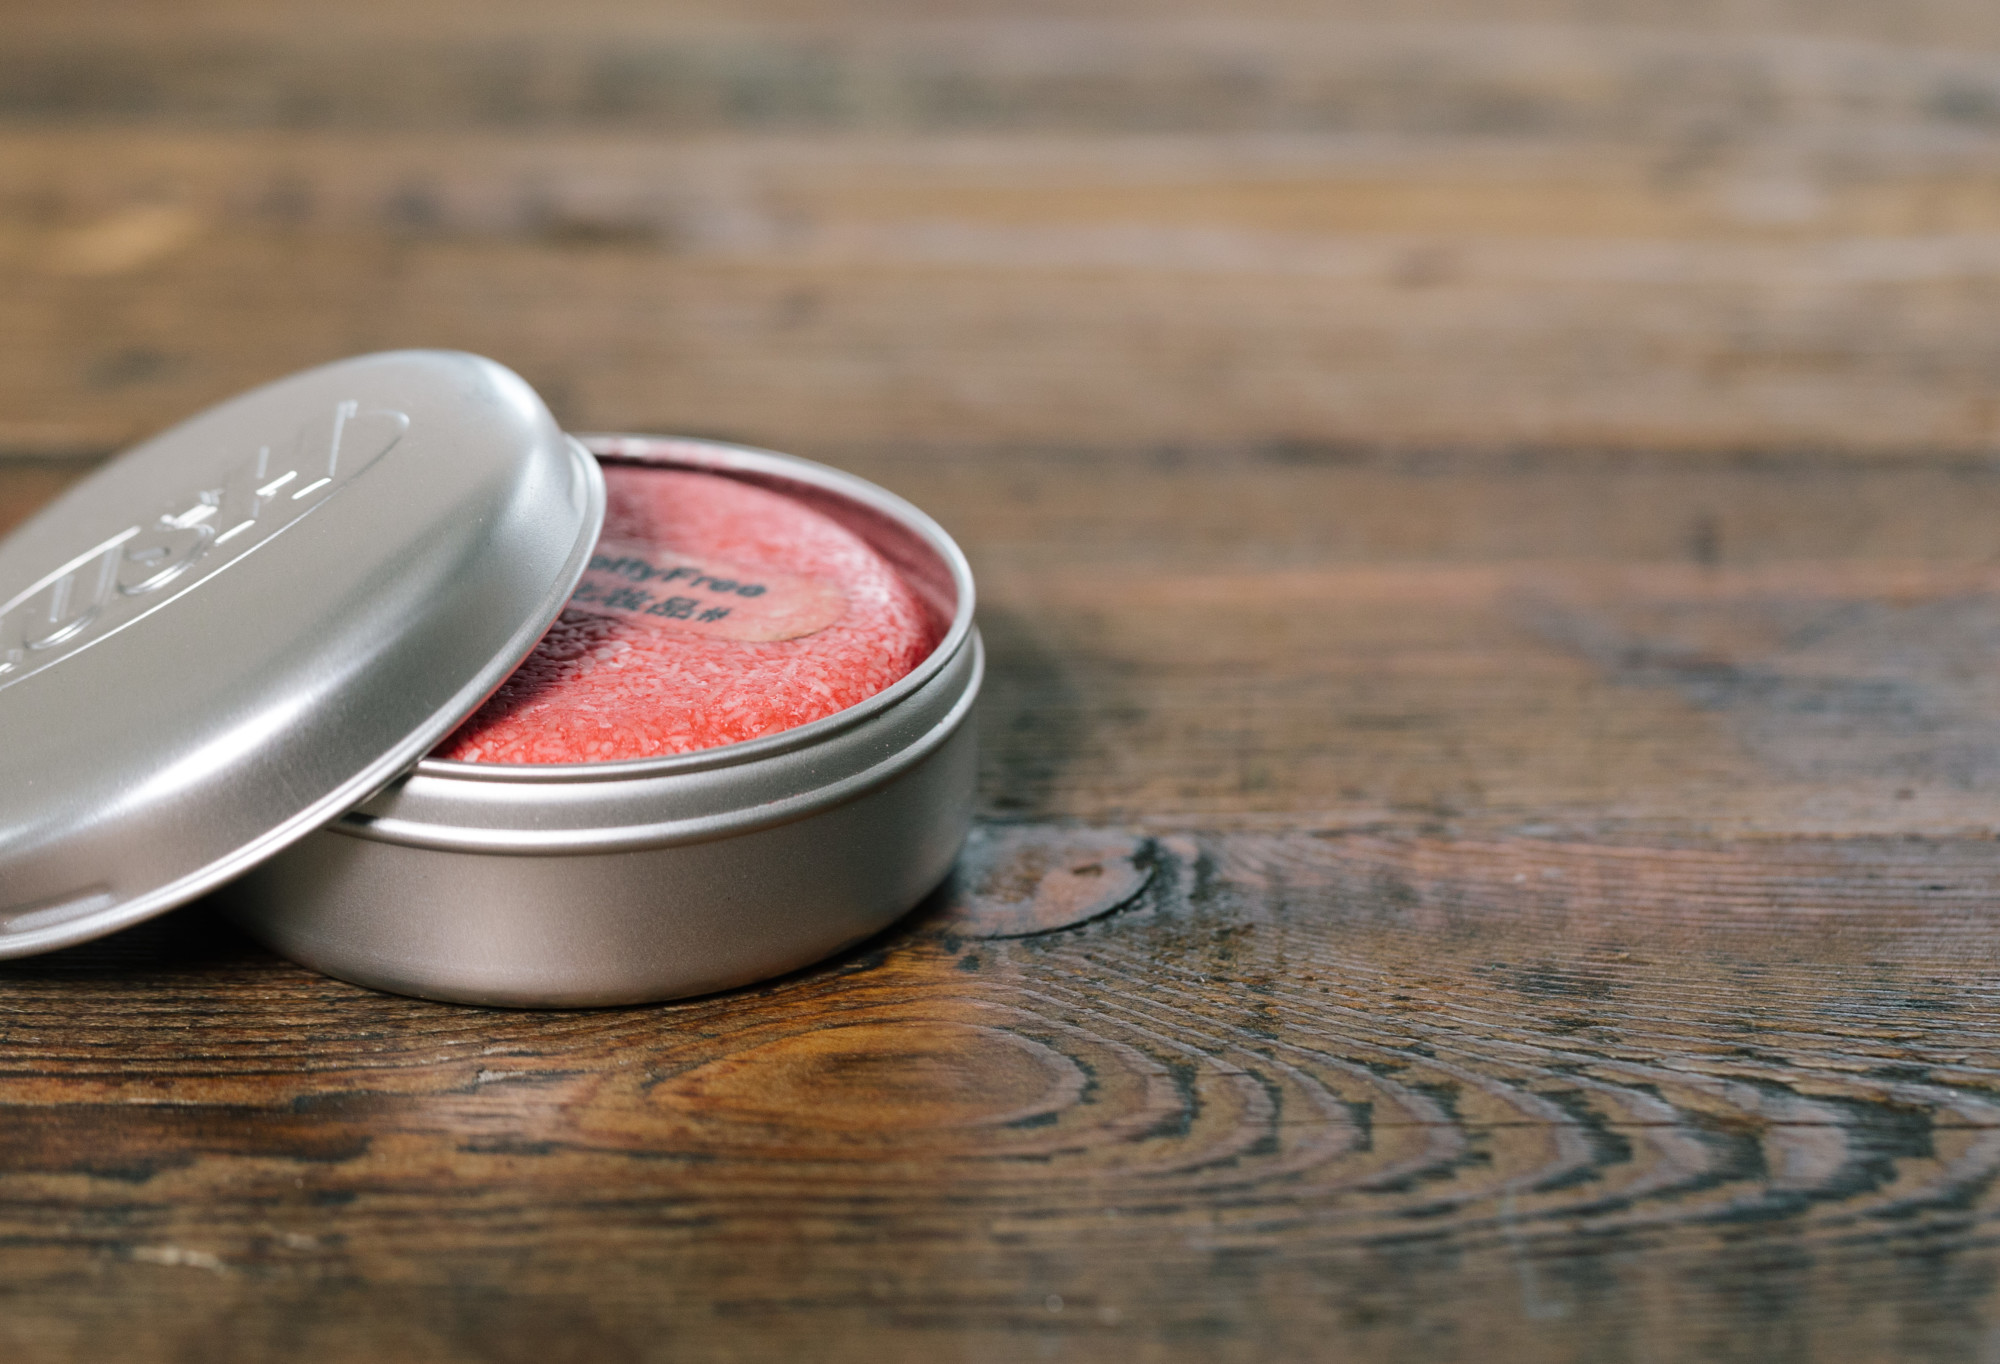 A round, silver metal product holder is being used to store a bright red New shampoo bar, just visible under the lid.